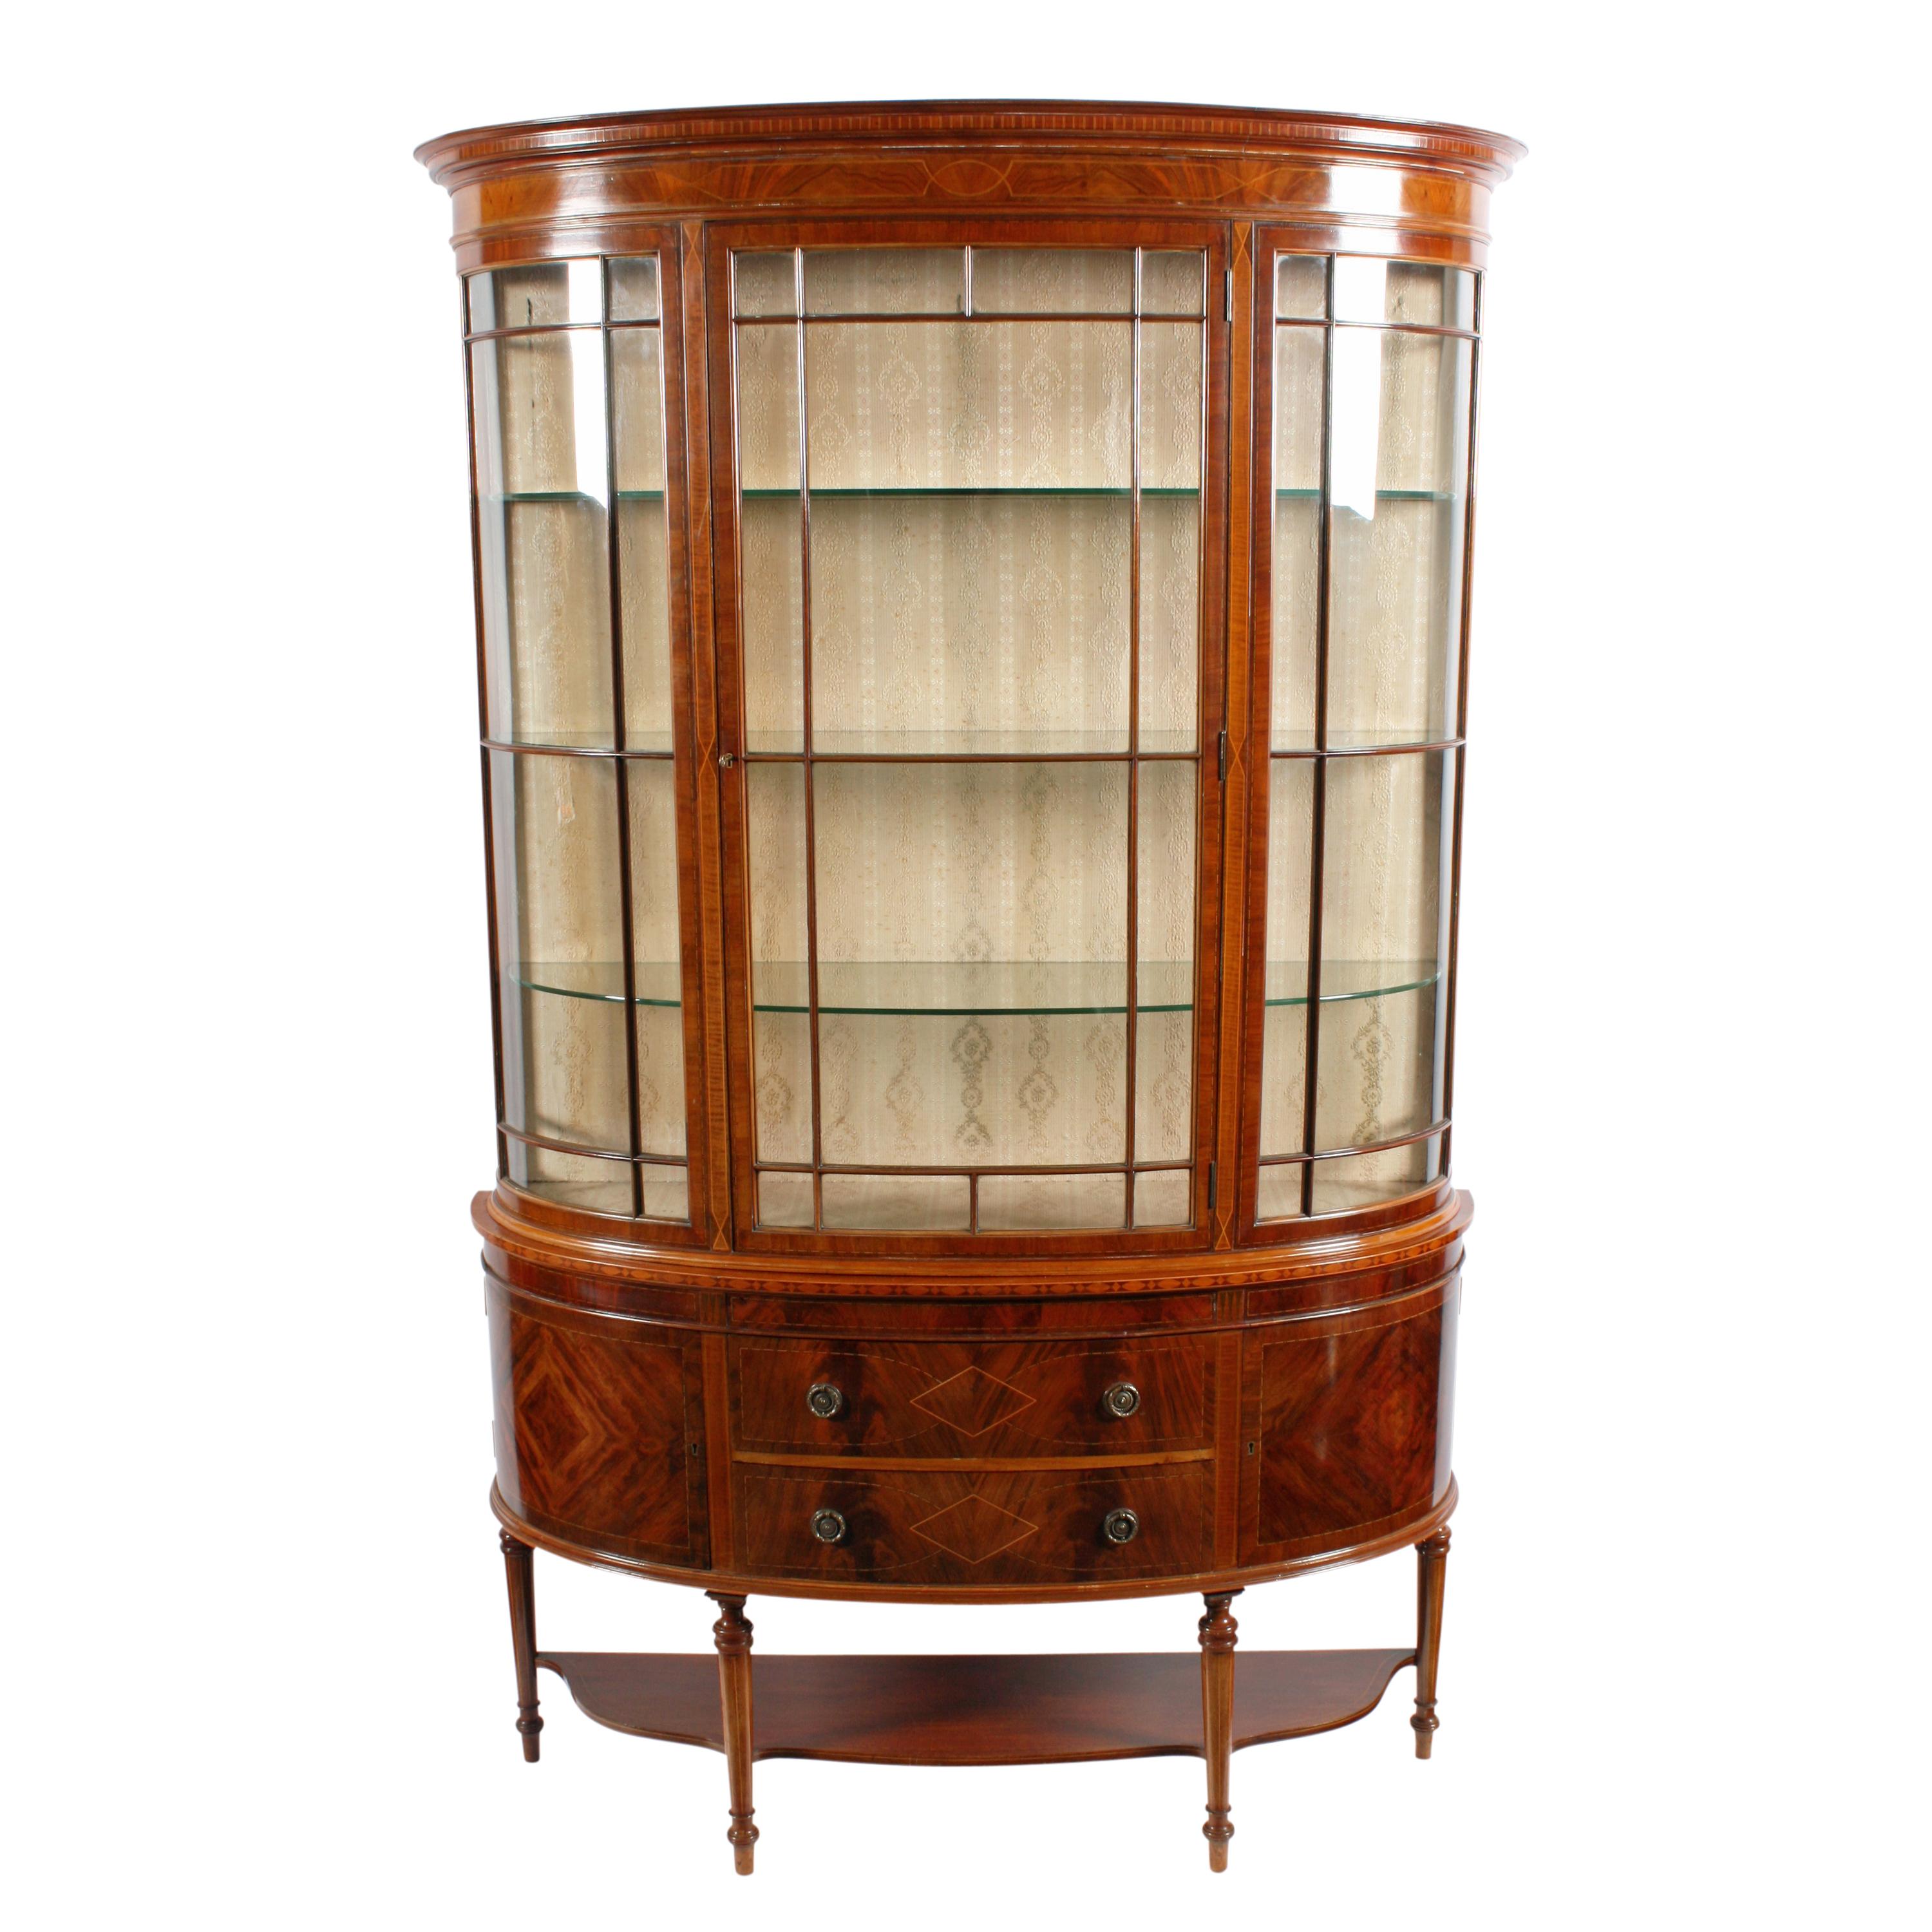 A fine quality Edwardian inlaid mahogany demilune display cabinet.

The cabinet has a central bow door with glazed bow side panels and three removable glass shelves.

The base has two mahogany lined drawers with brass ring handles and to either